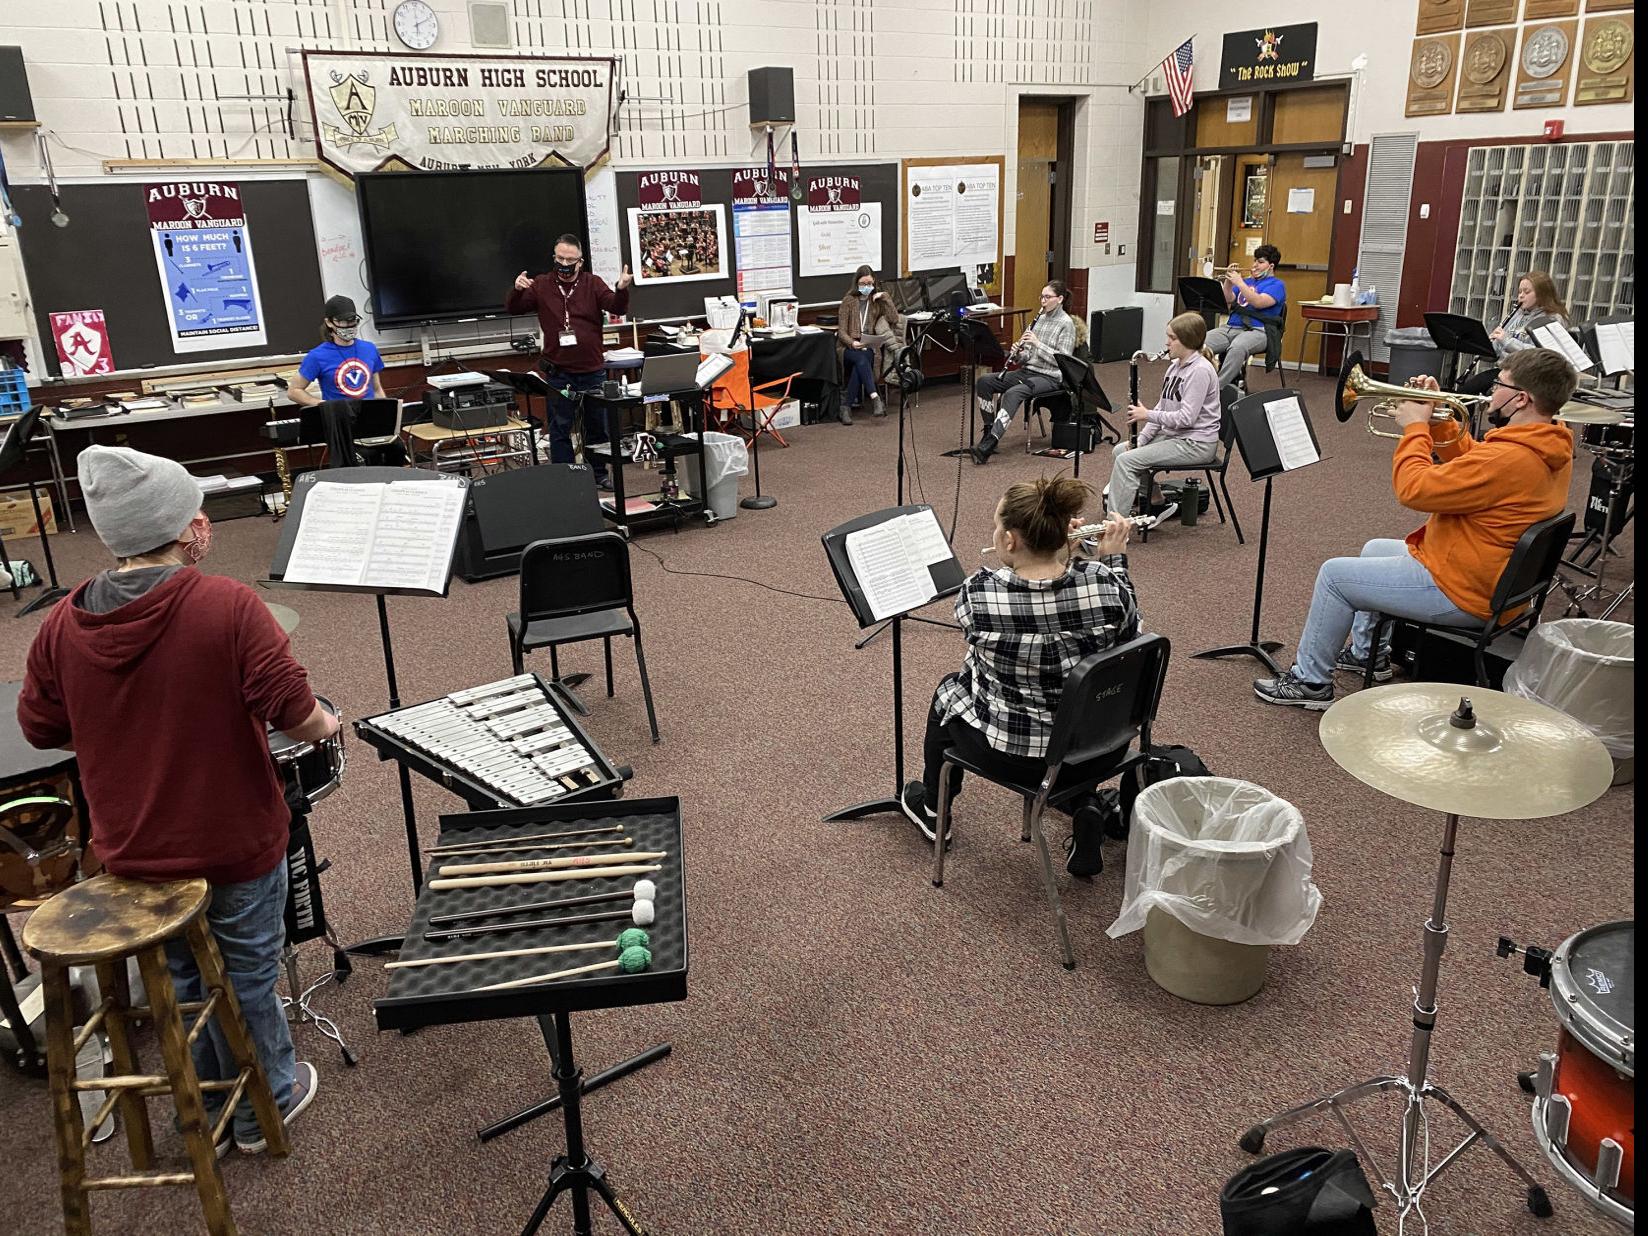 Let them play': Lawmakers, teachers ask NY to ease restrictions on school  music programs | Politics | auburnpub.com